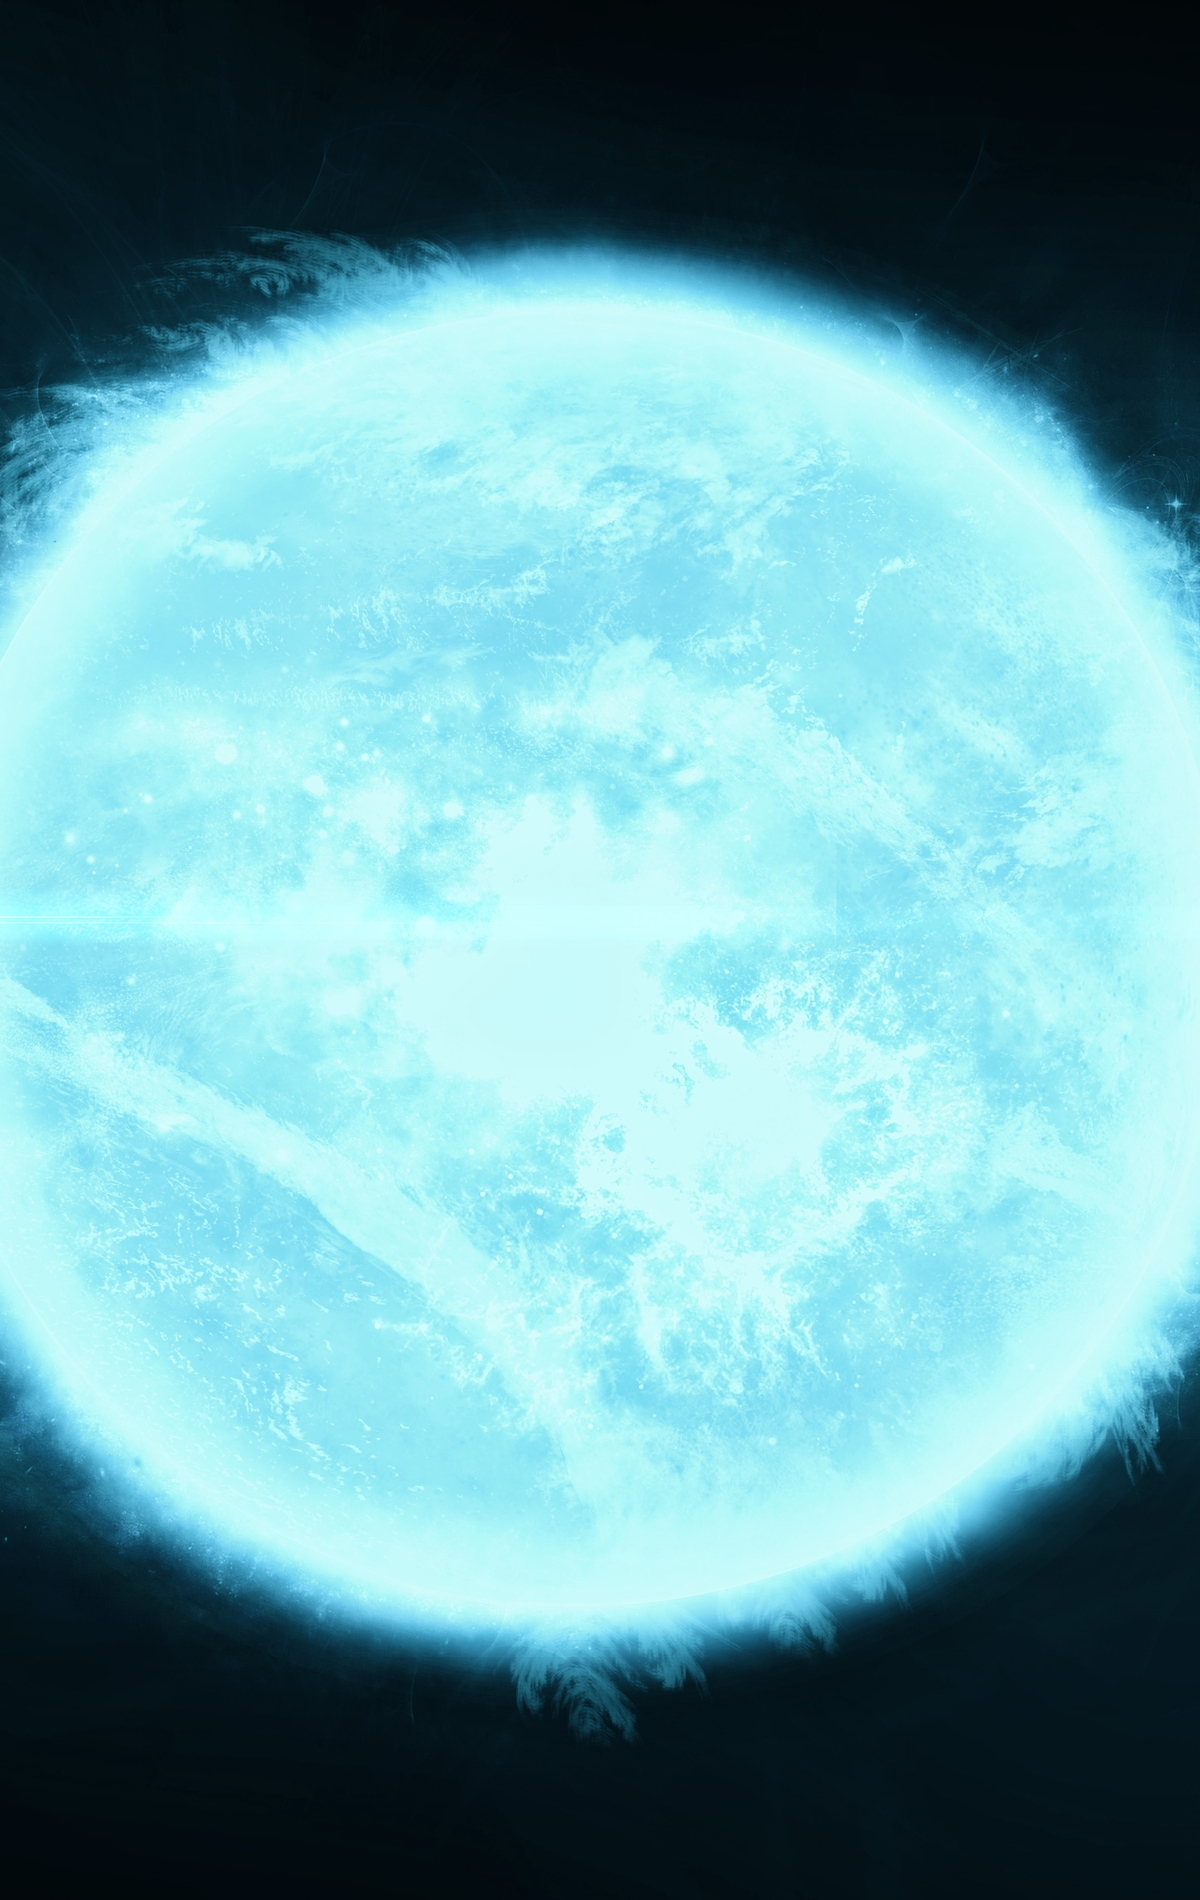 Image: Star, blue, gas, light, space, planet